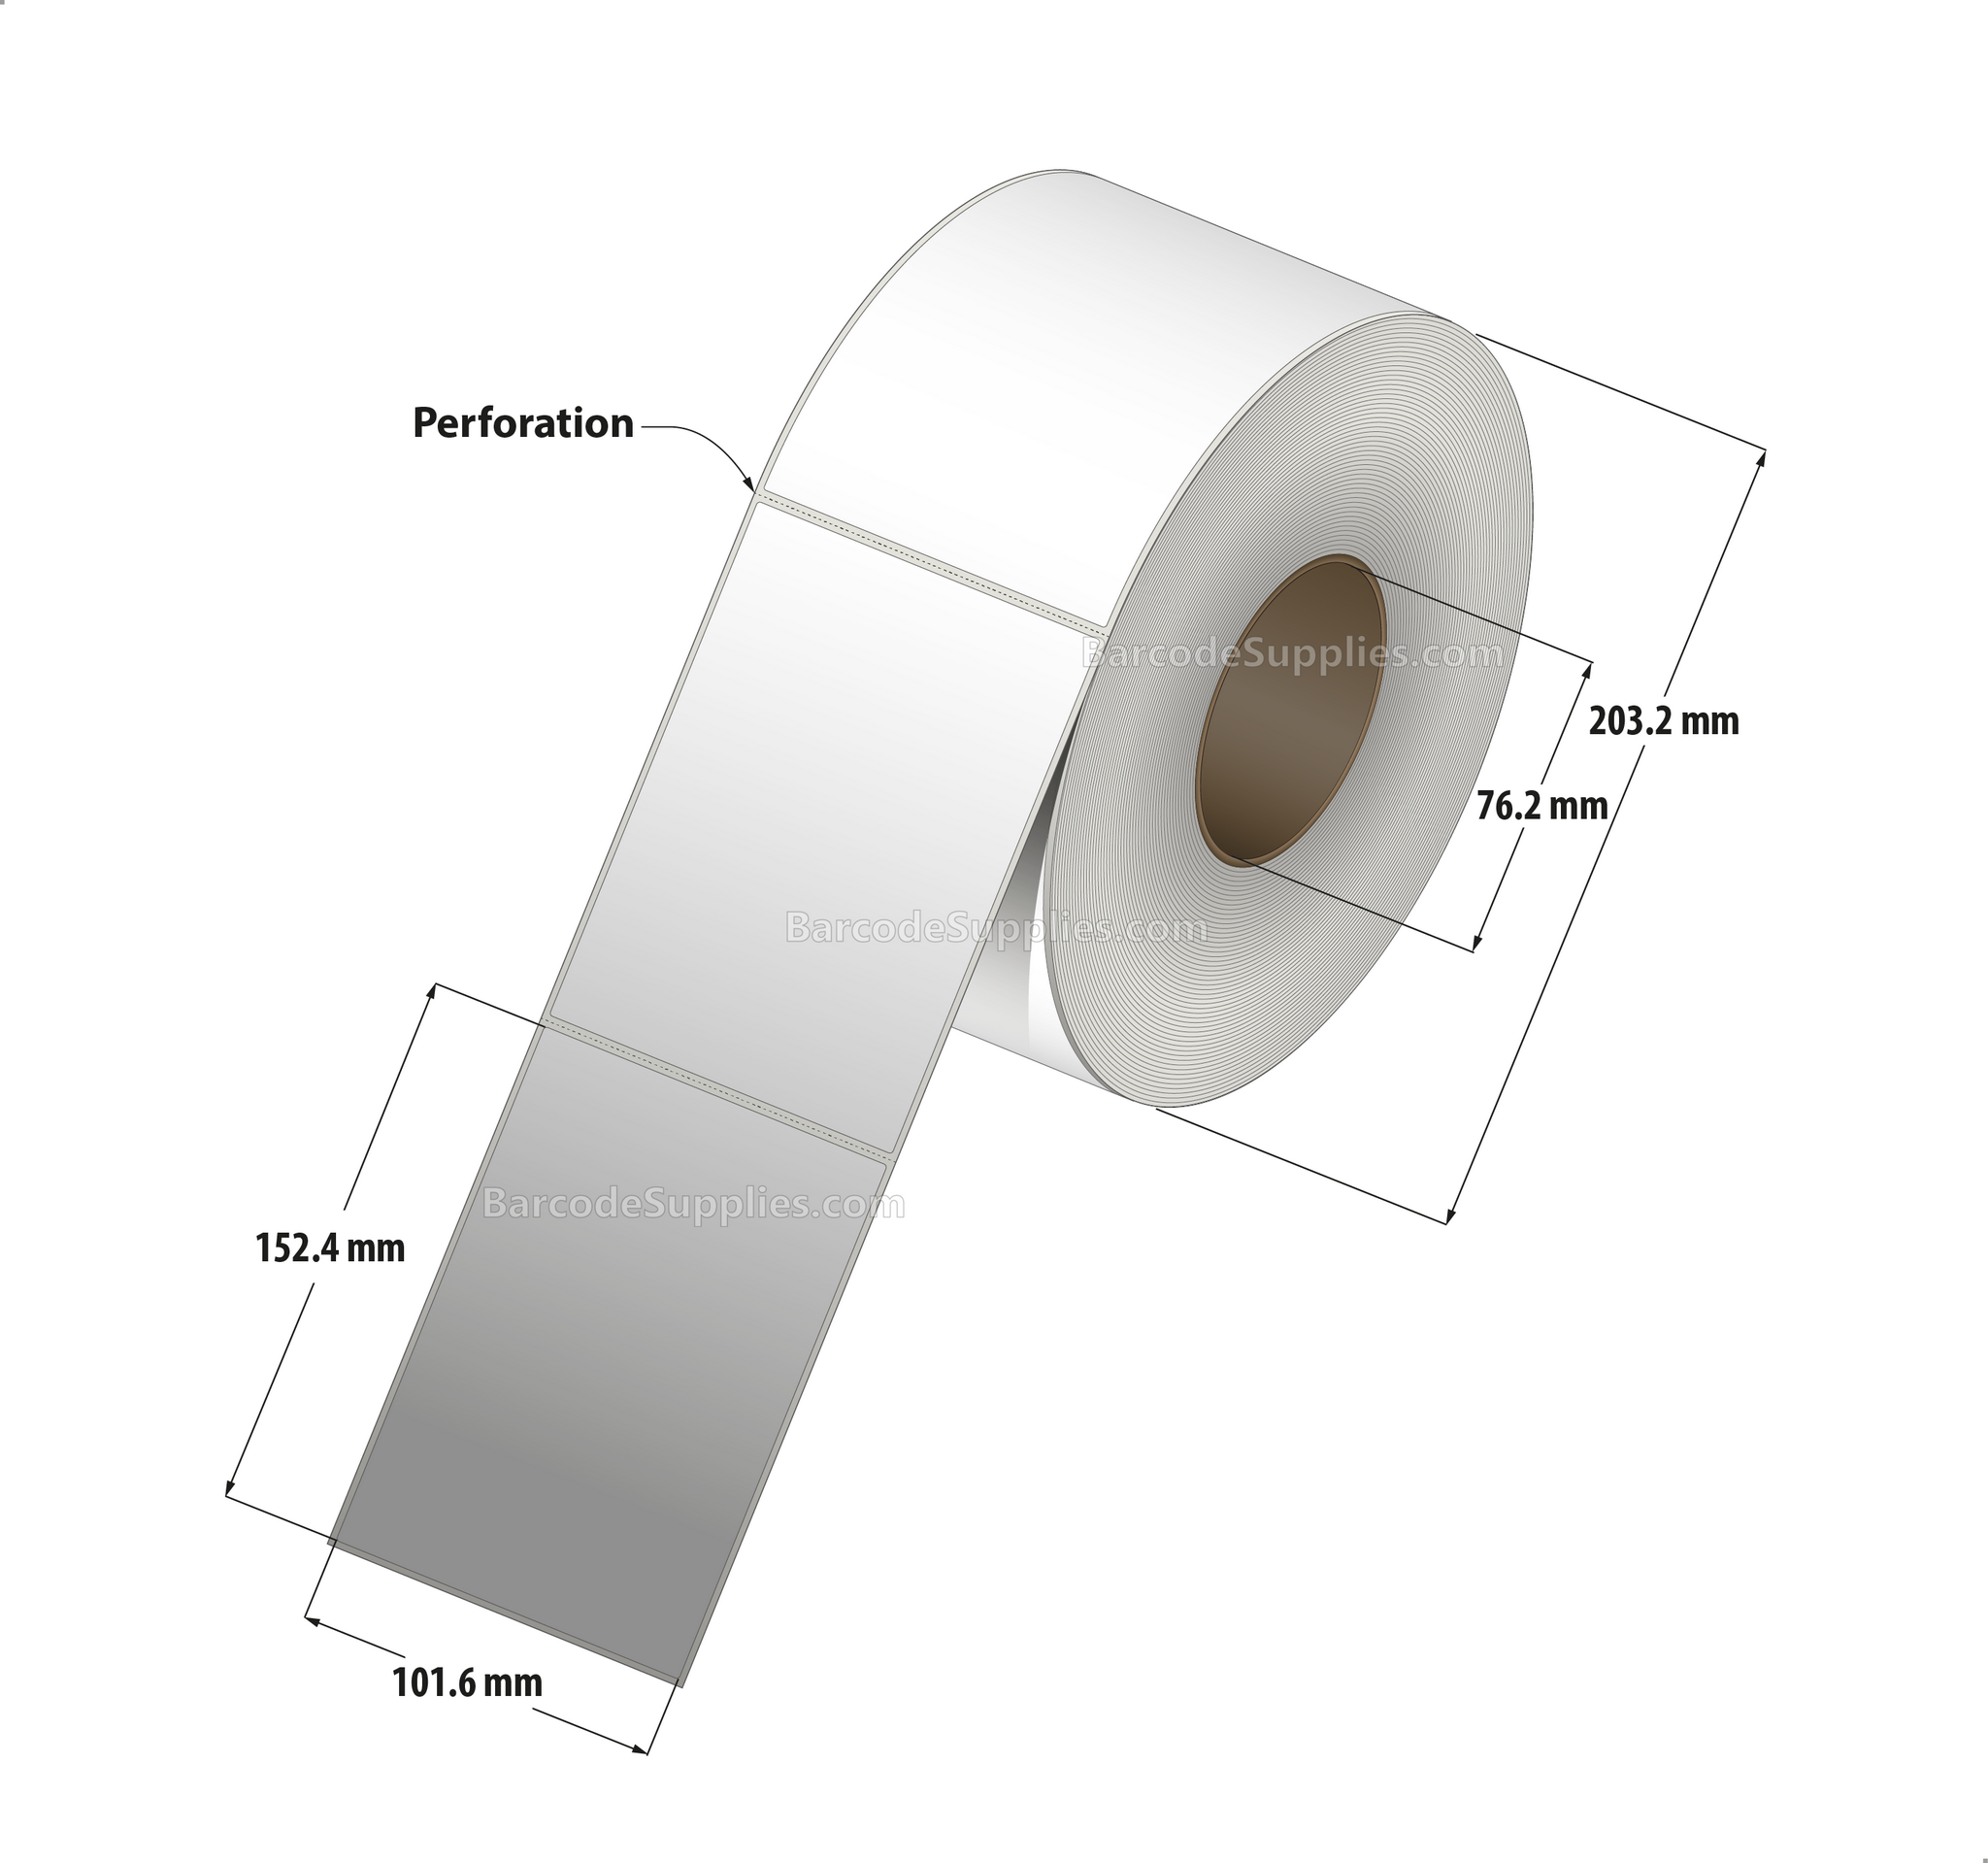 4 x 6 Thermal Transfer White Labels With Rubber Adhesive - Perforated - 1000 Labels Per Roll - Carton Of 4 Rolls - 4000 Labels Total - MPN: CTT400600-3P